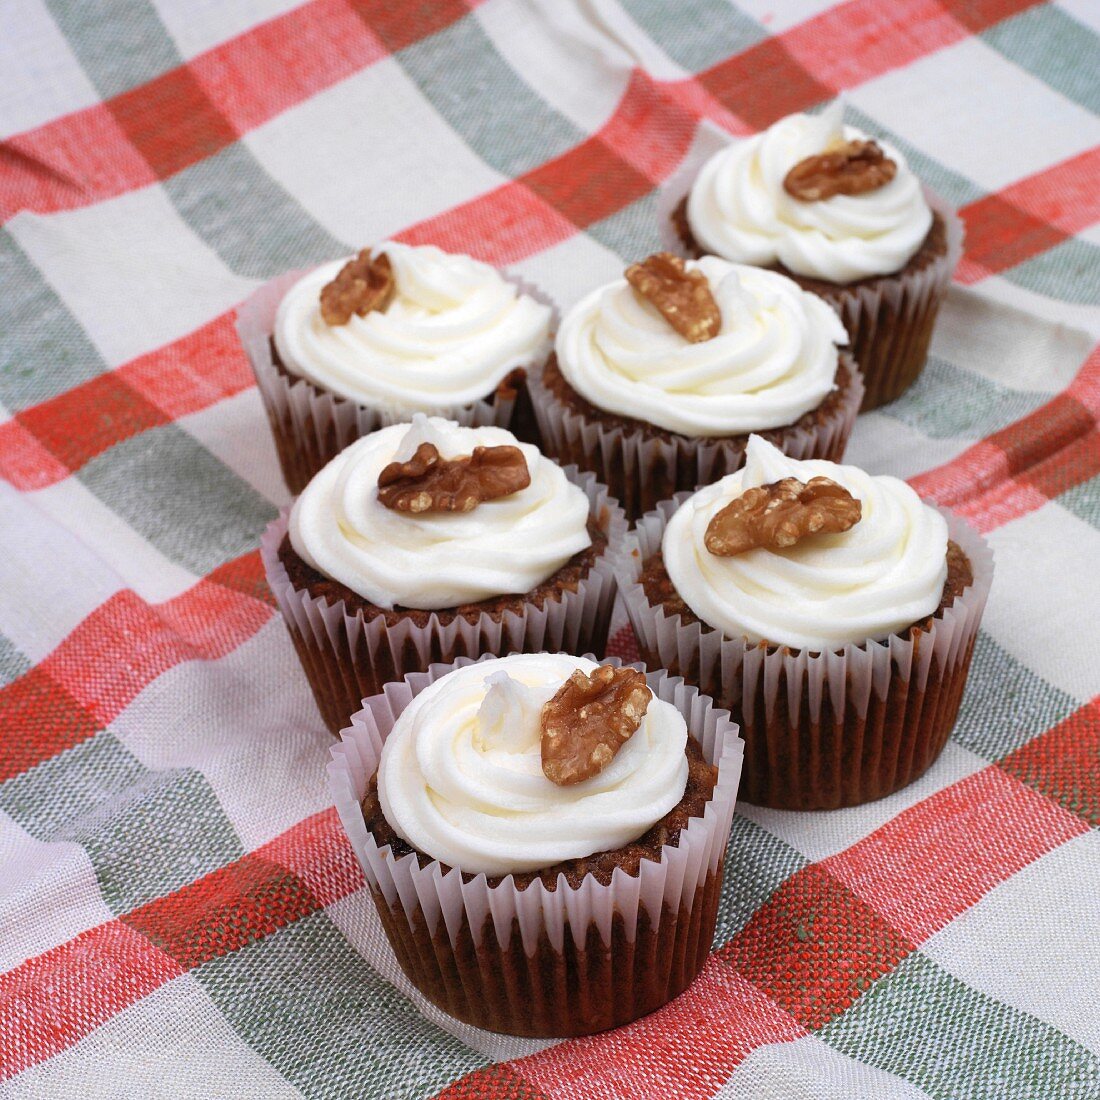 Cupcakes topped with icing and walnuts